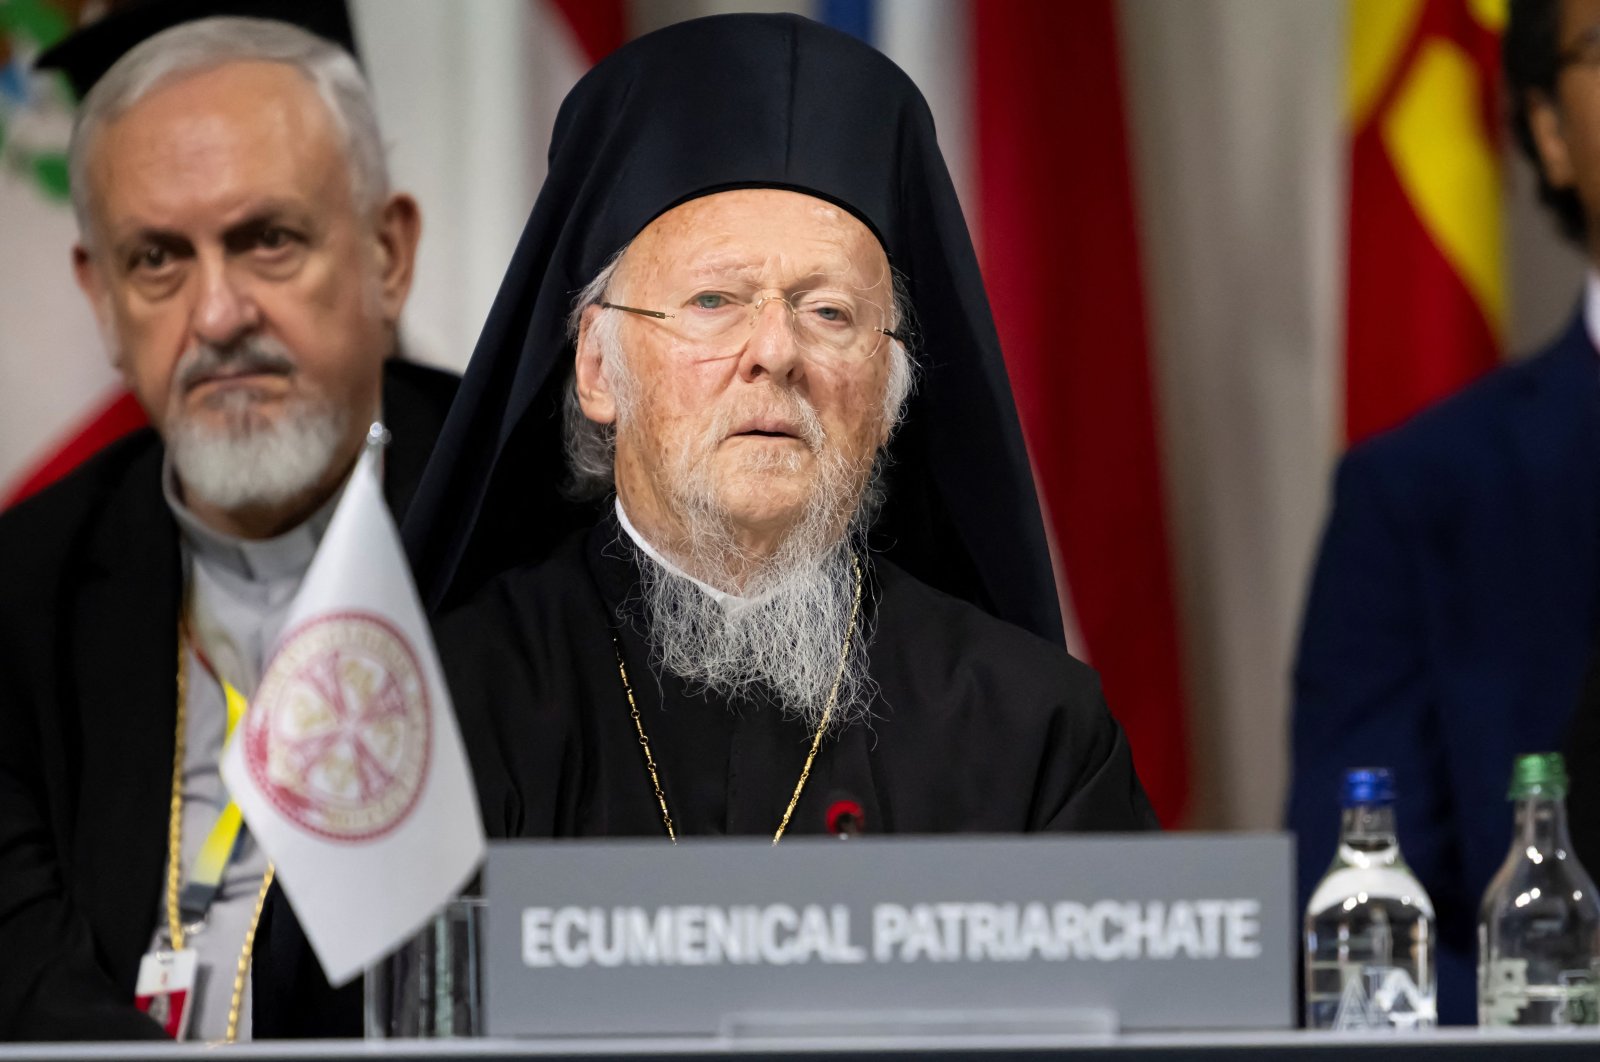 The &quot;Ecumenical Patriarchate&quot; sign is prominently displayed in front of Patriarch Bartholomew I as he attends the summit, Stansstad, Switzerland, June 16, 2024. (EPA Photo)